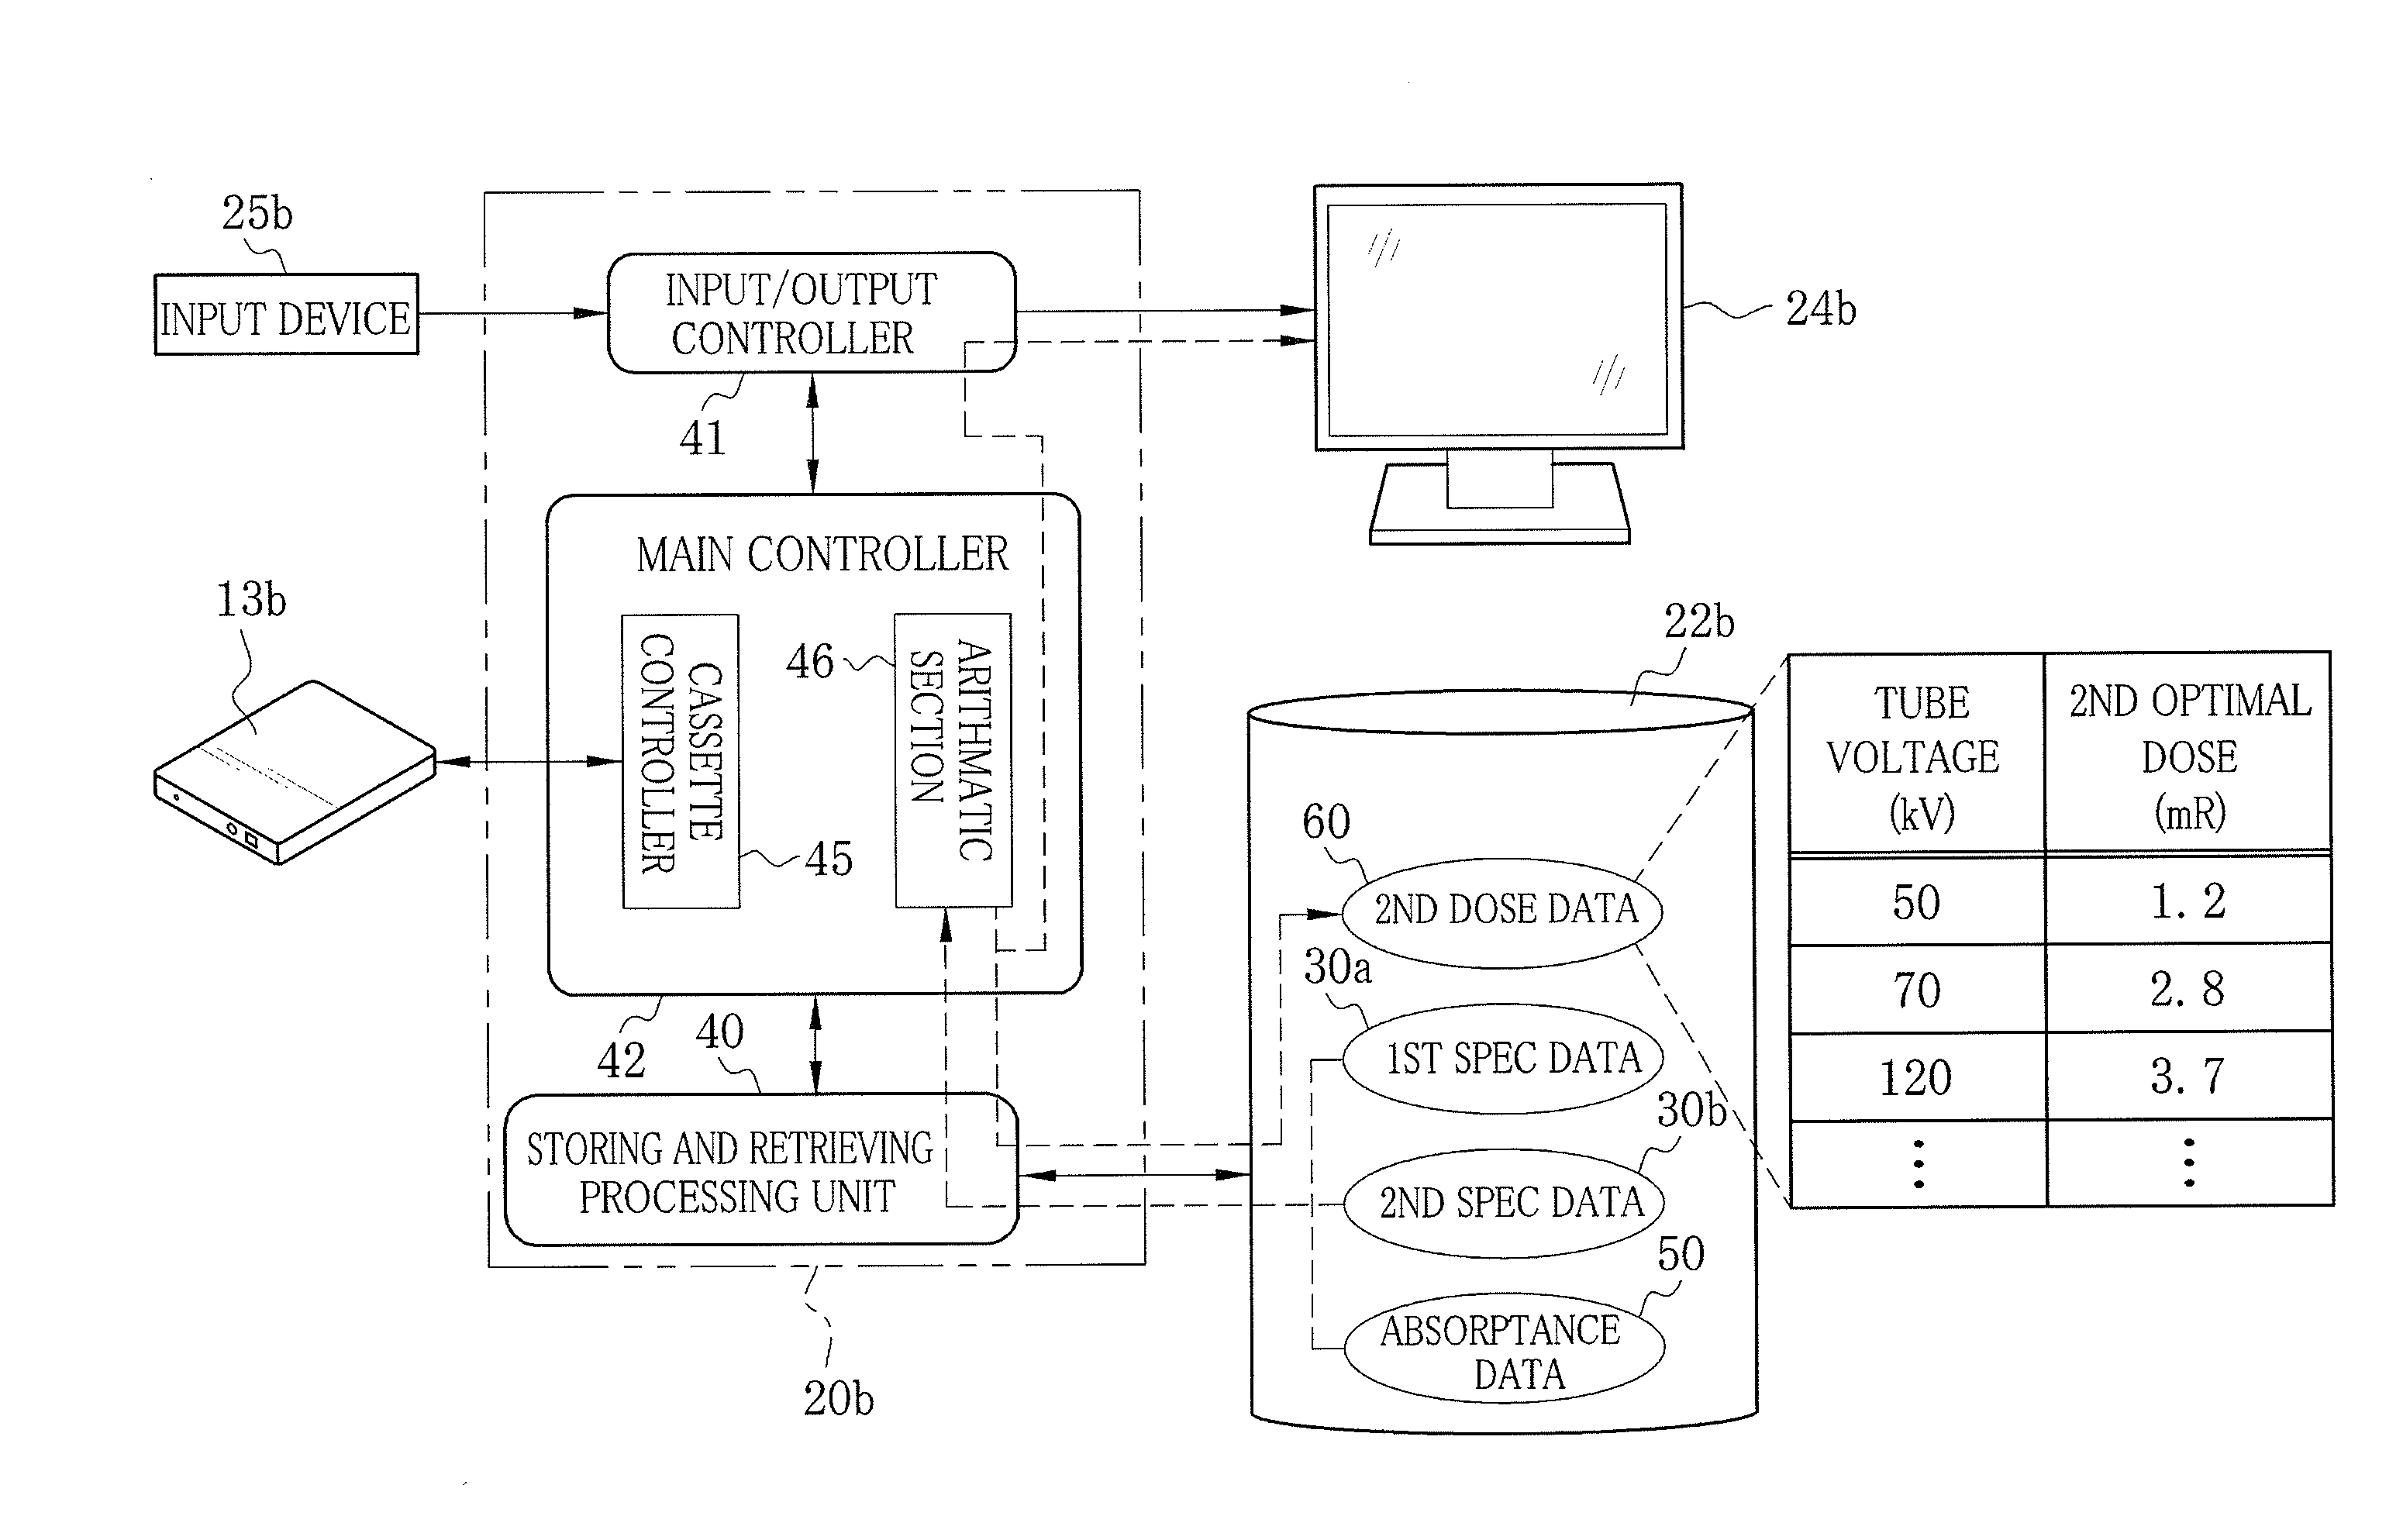 Radiation dose information sharing device and method